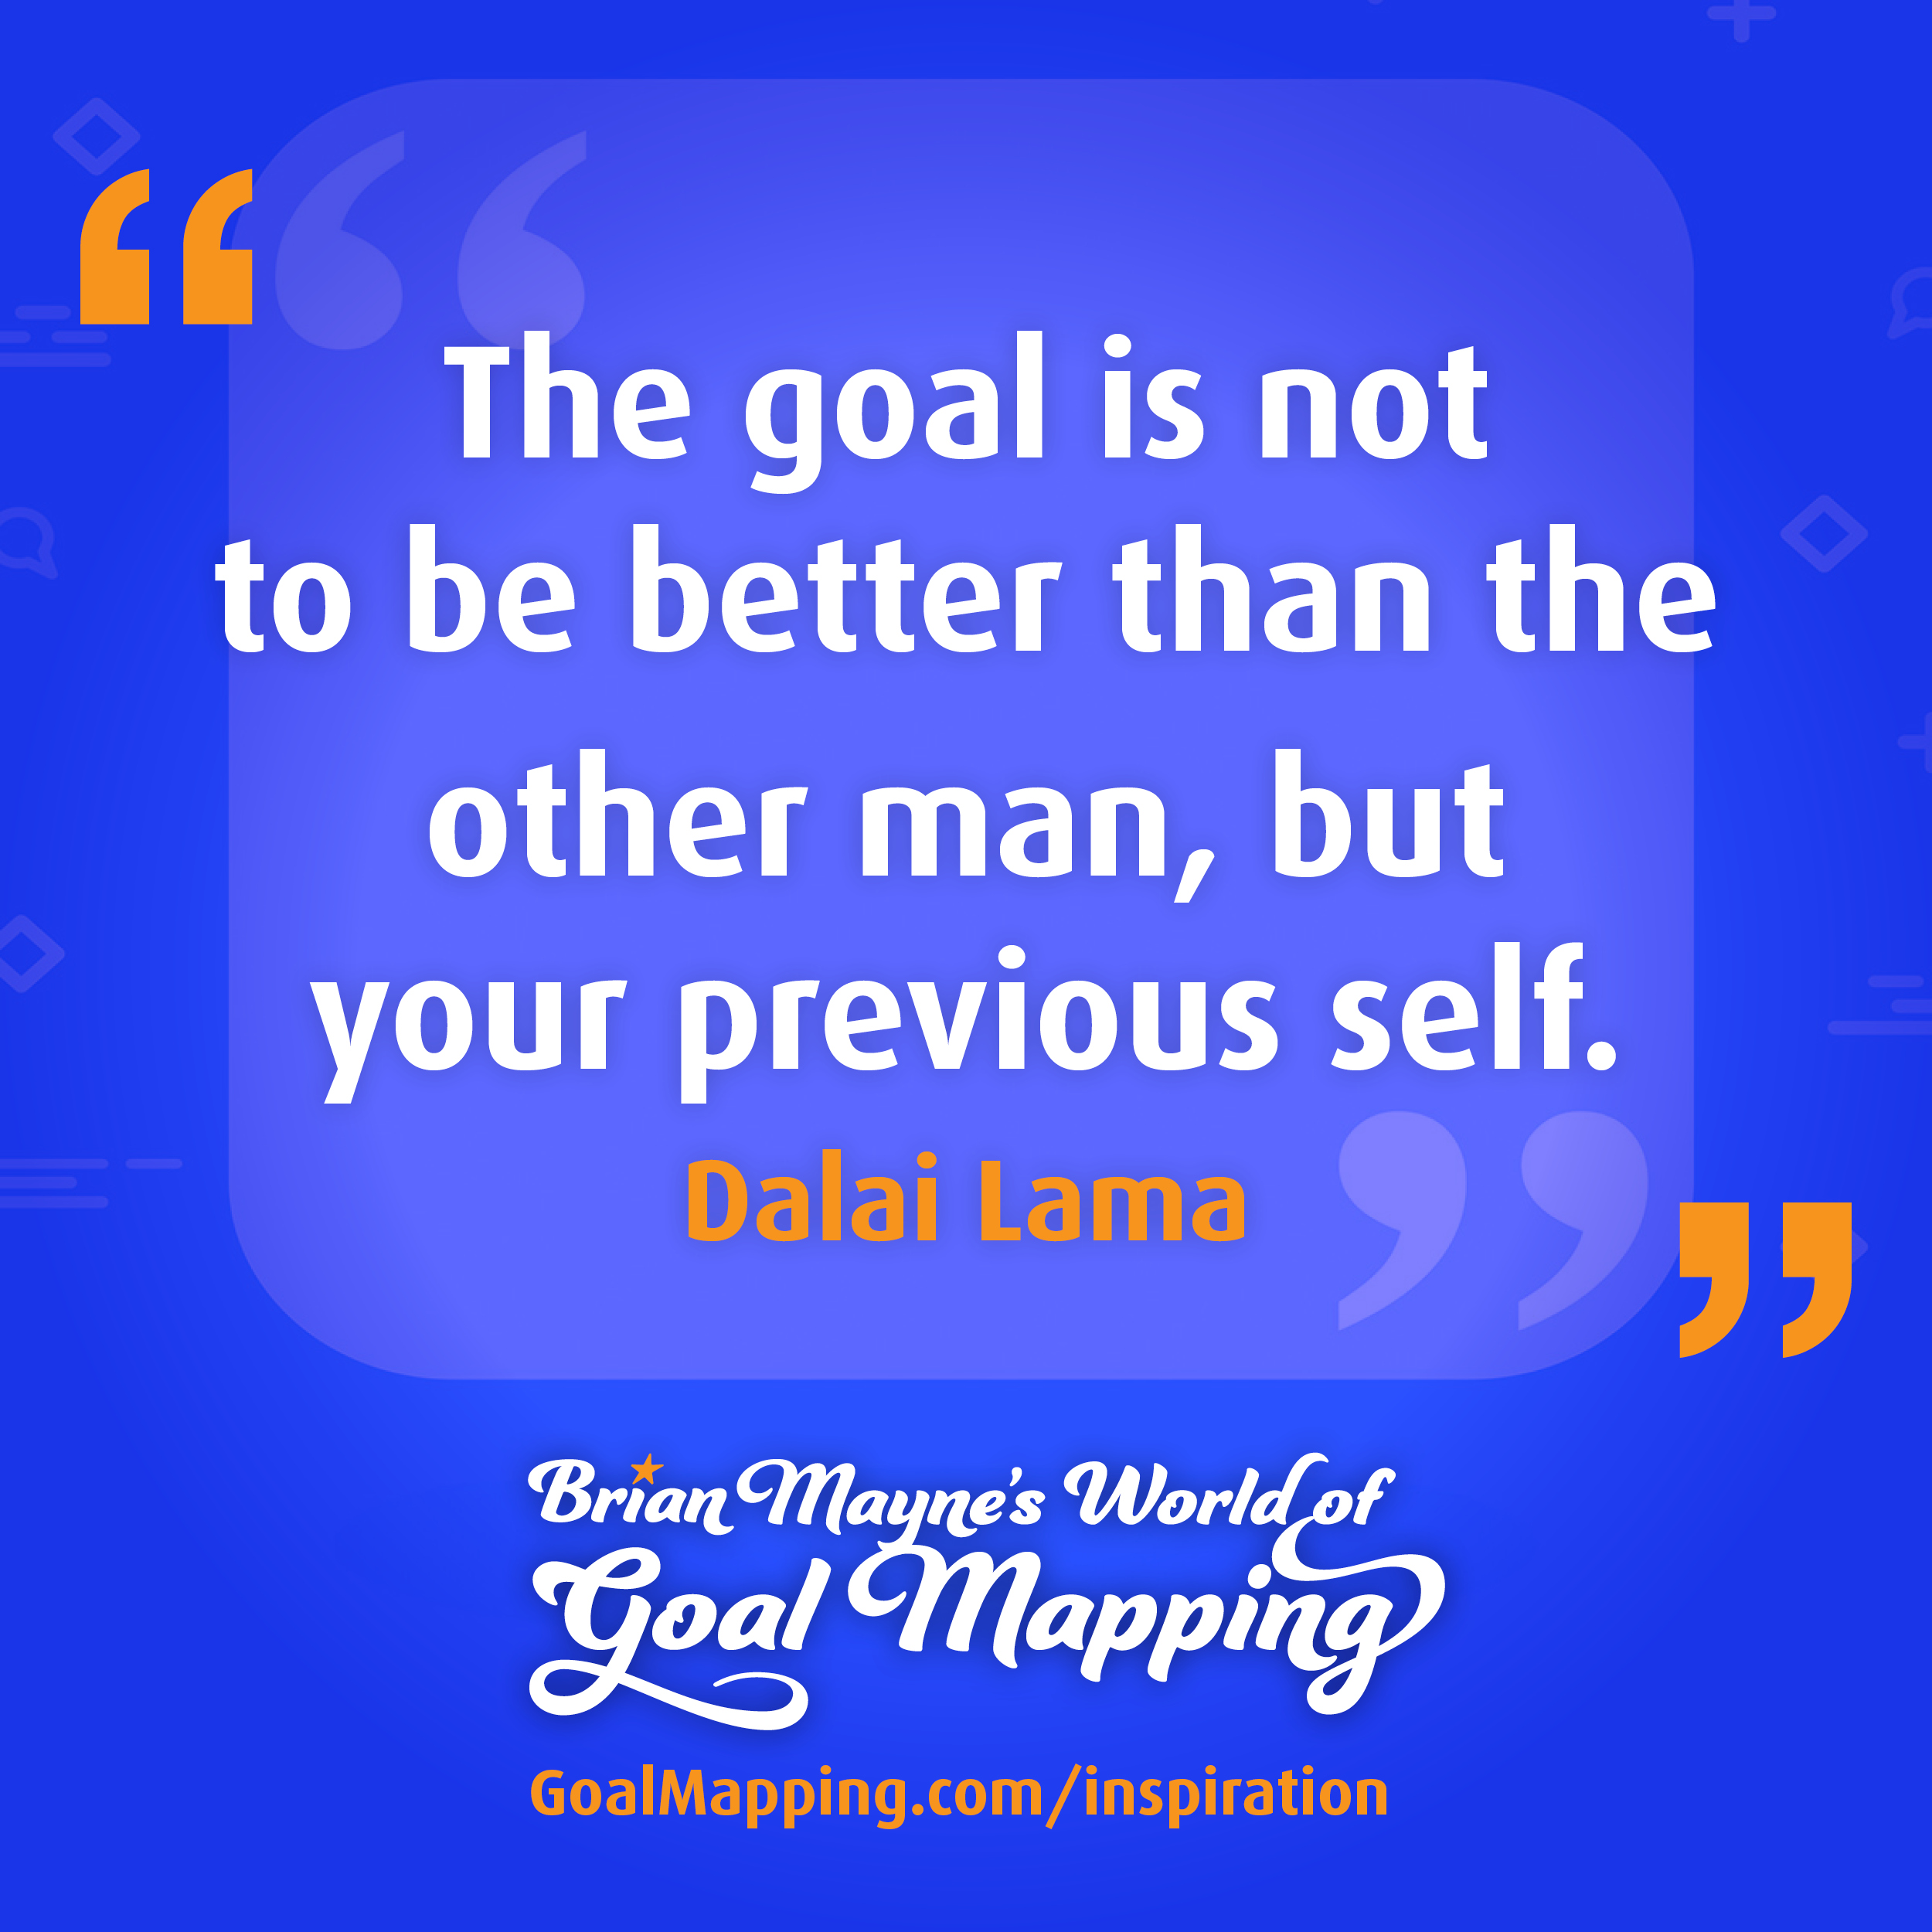 "The goal is not to be better than the other man, but your previous self." Dalai Lama